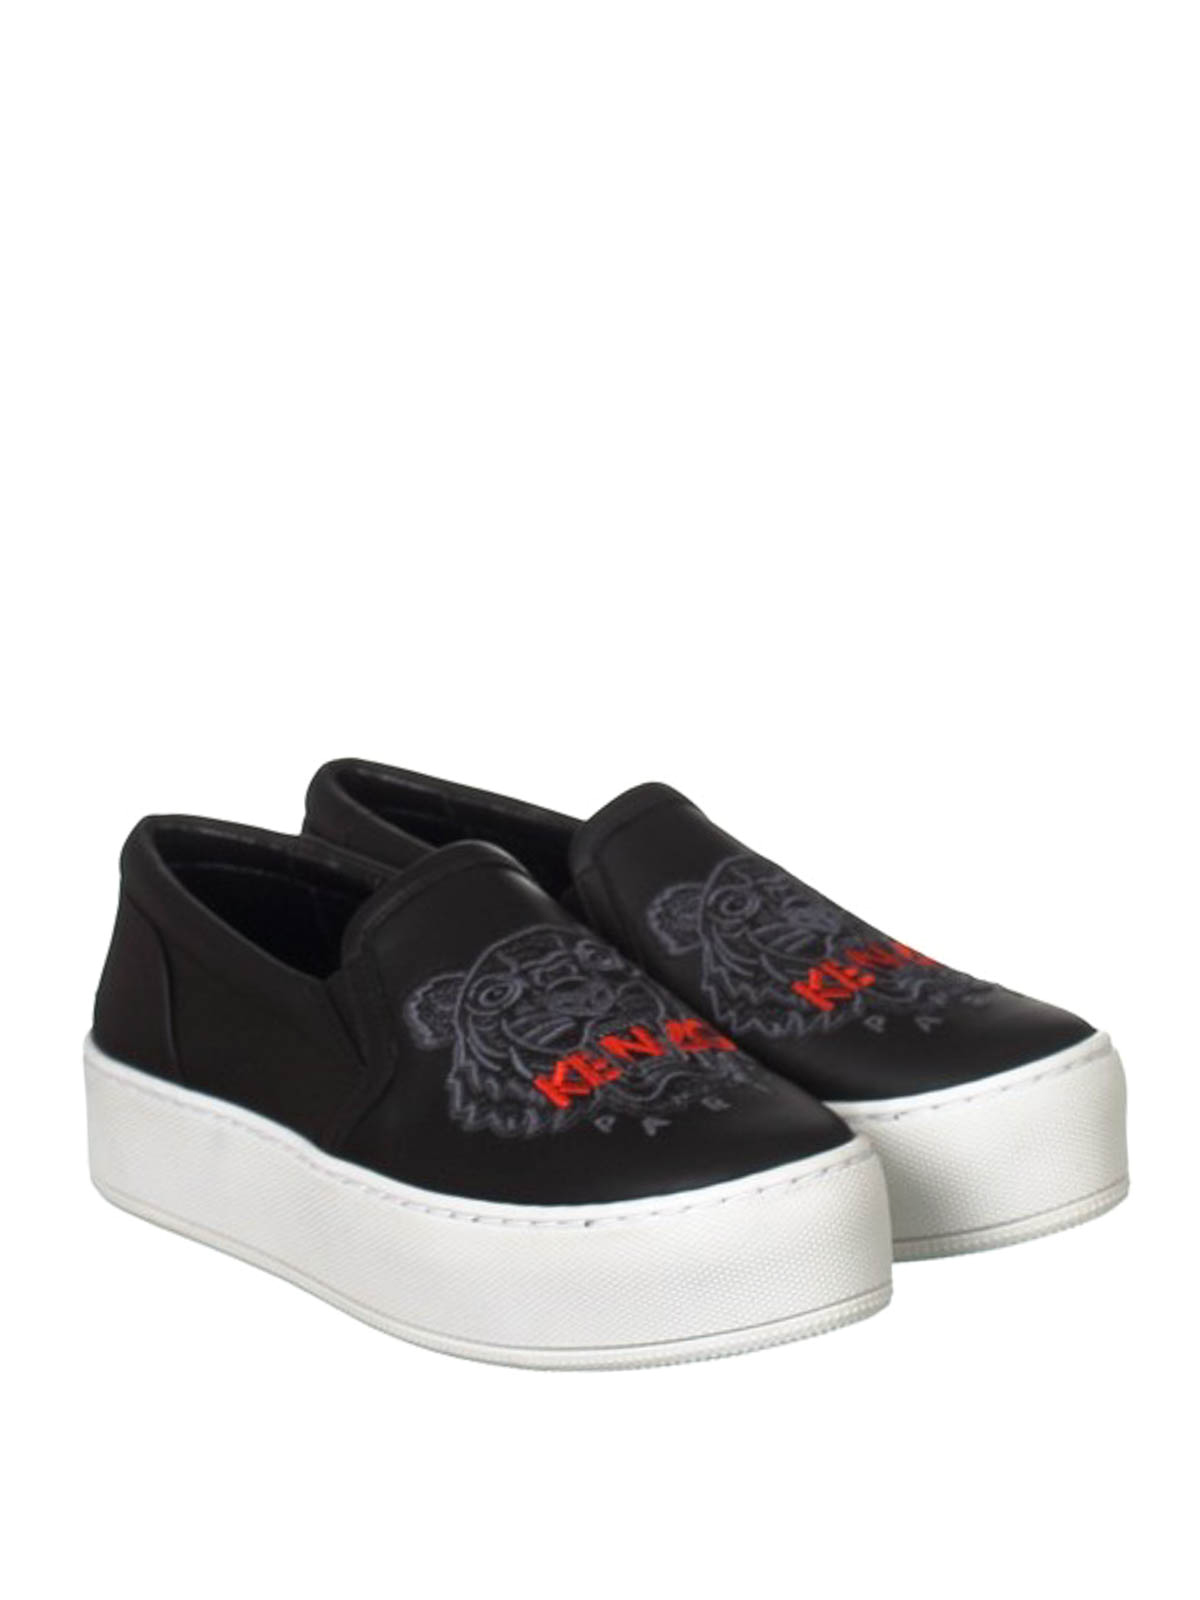 Kenzo - Tiger leather slip-on sneakers 